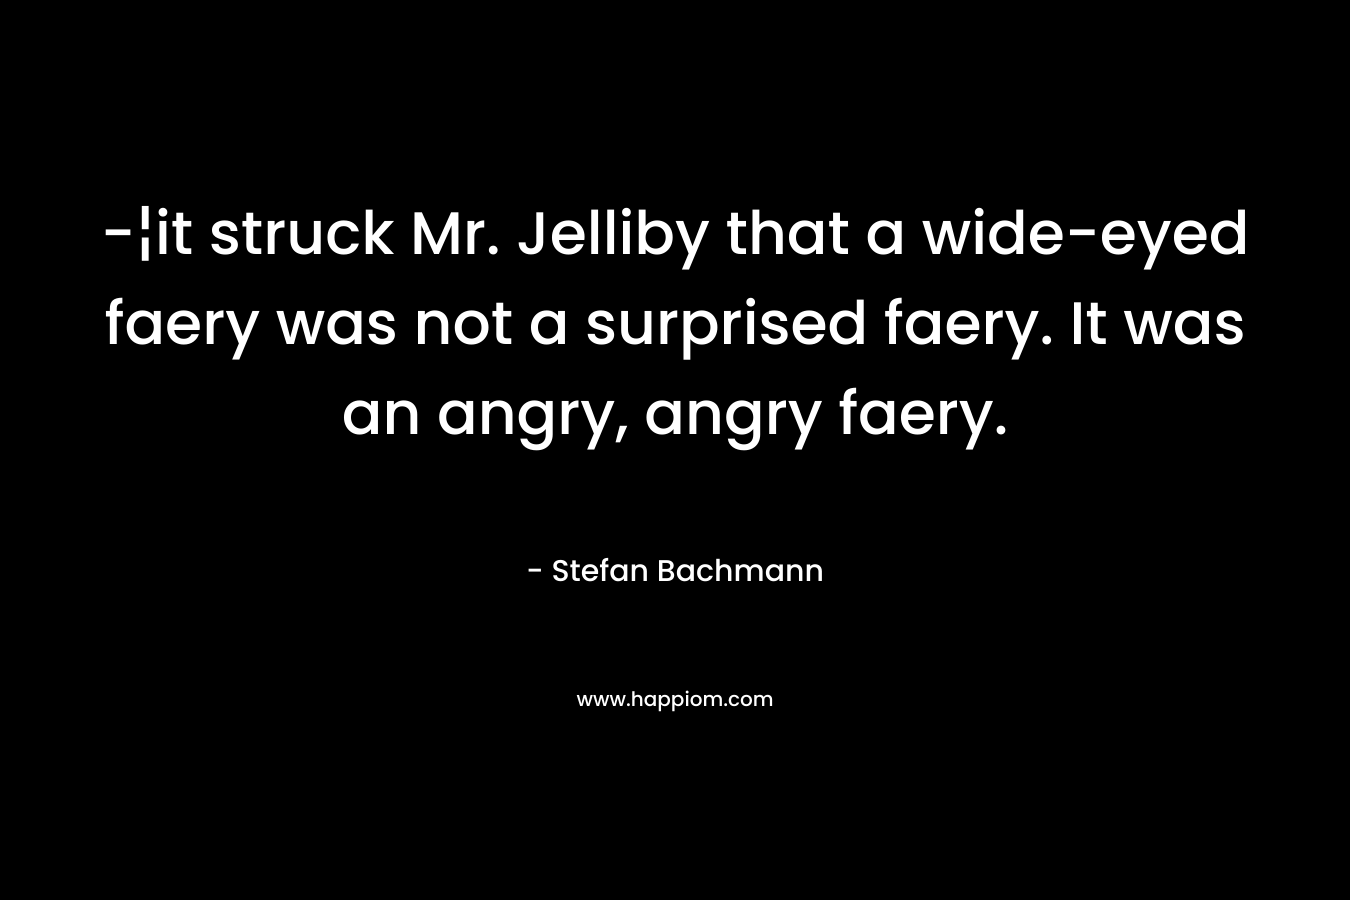 -¦it struck Mr. Jelliby that a wide-eyed faery was not a surprised faery. It was an angry, angry faery. – Stefan Bachmann